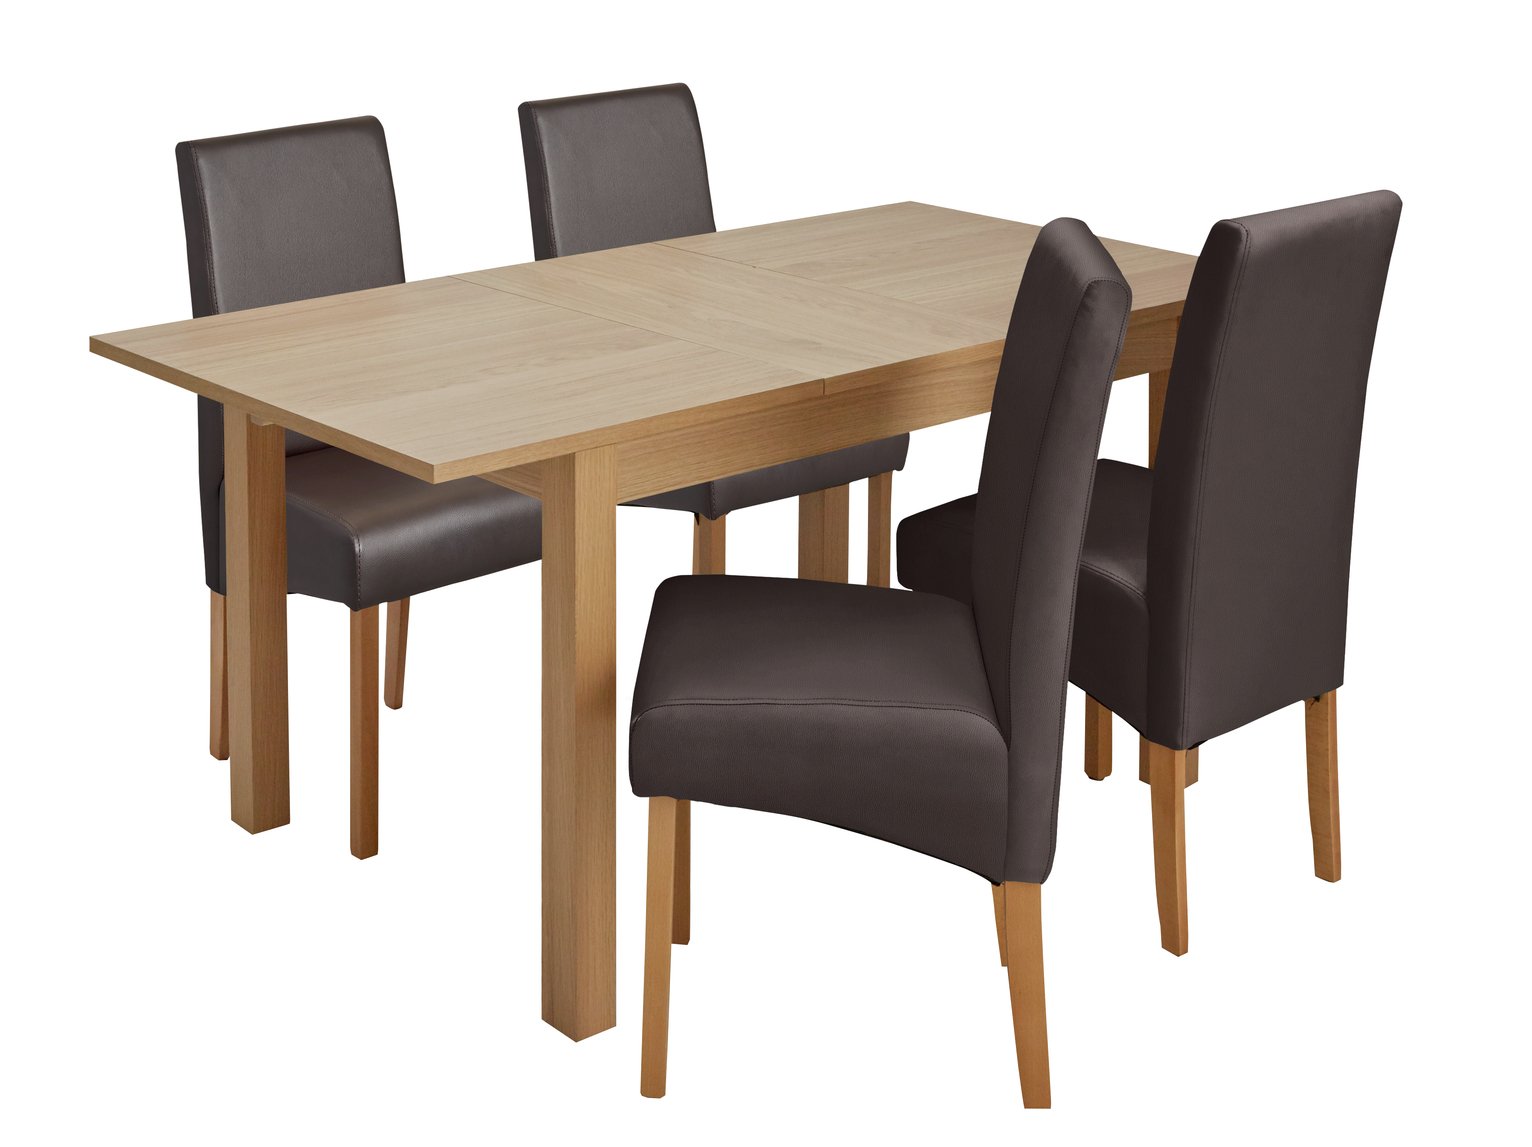 Argos Home Clifton Oak Extending Table & 4 Chocolate Chairs